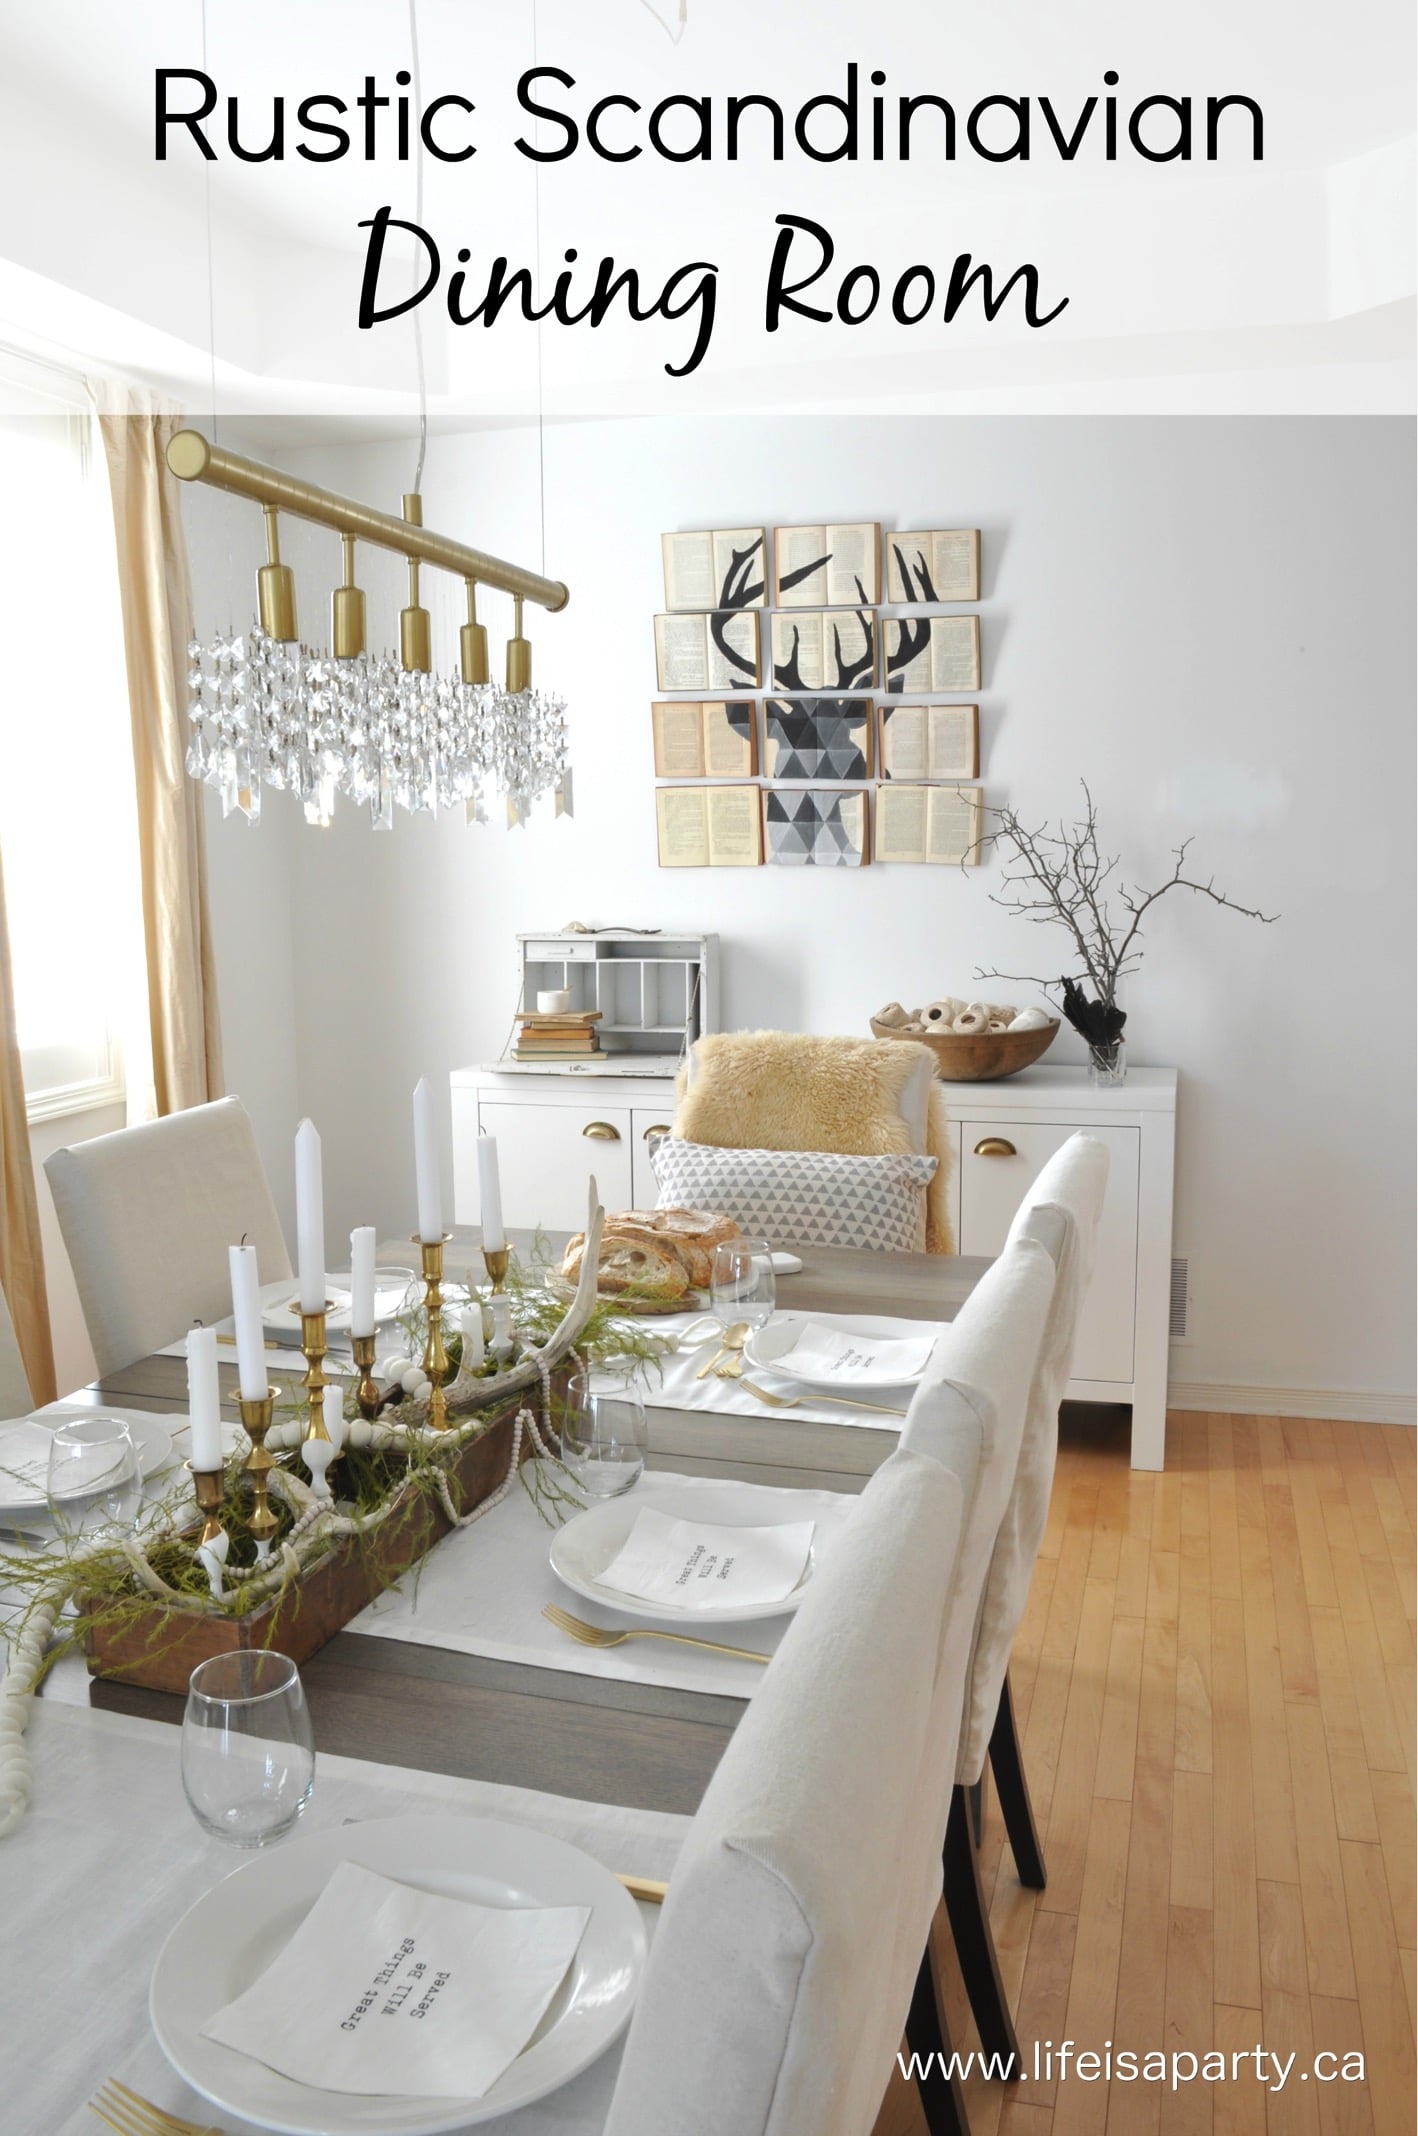 Rustic Scandinavian Dining Room Makeover: final reveal of the six week dining room makeover with before and after pictures.